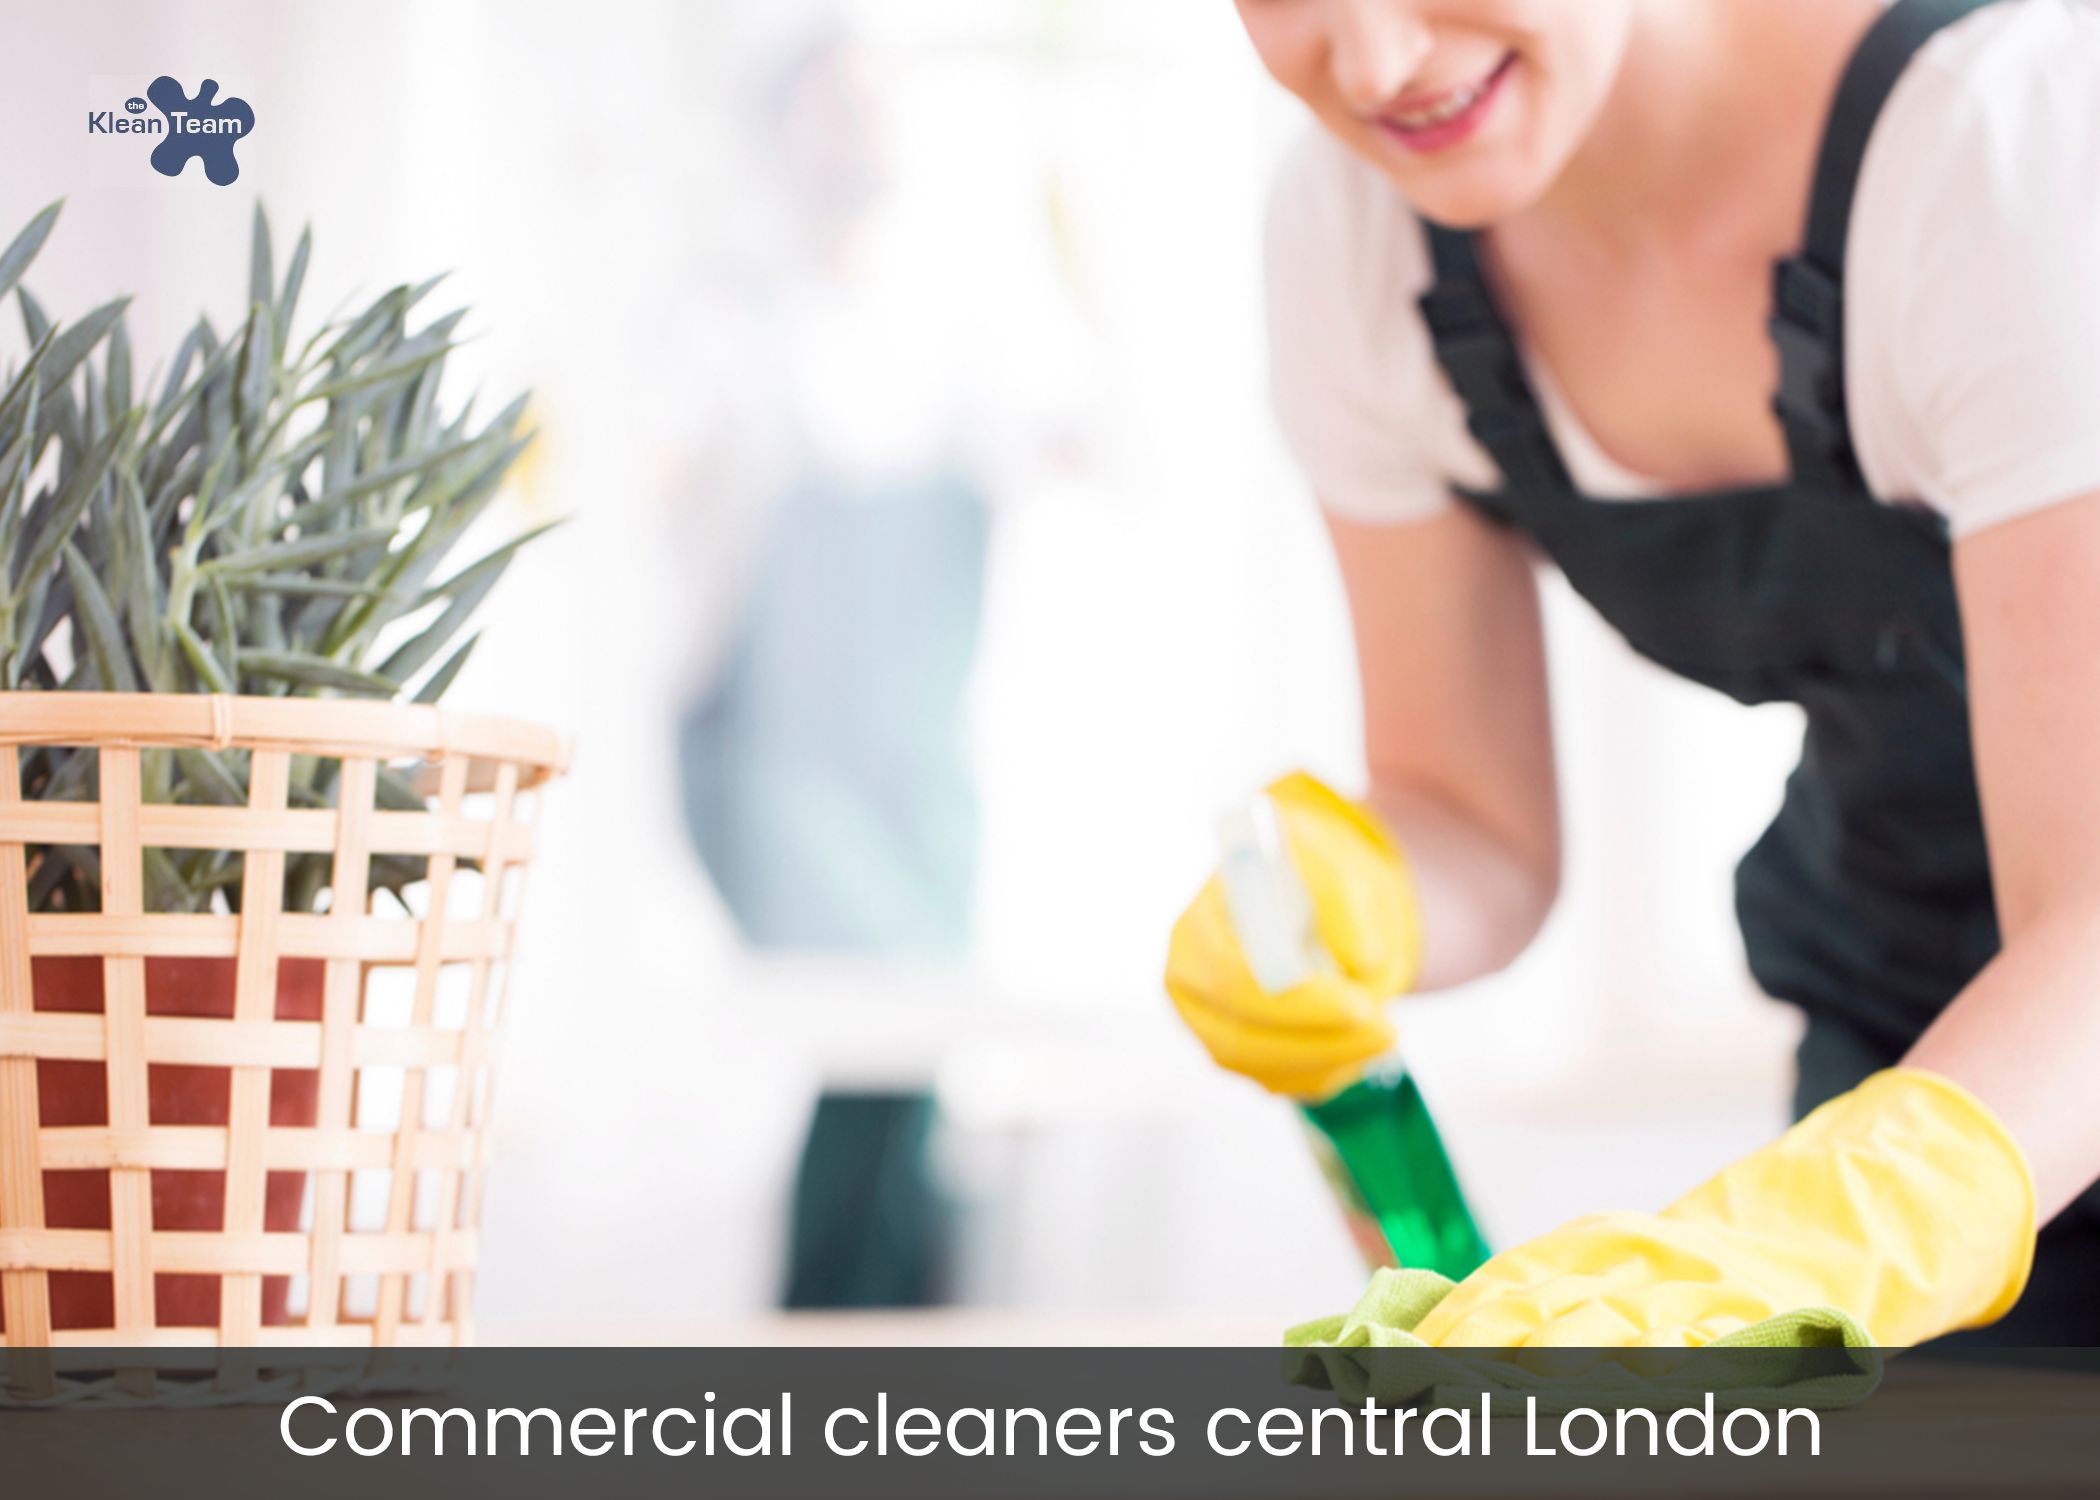 Commercial cleaners central London